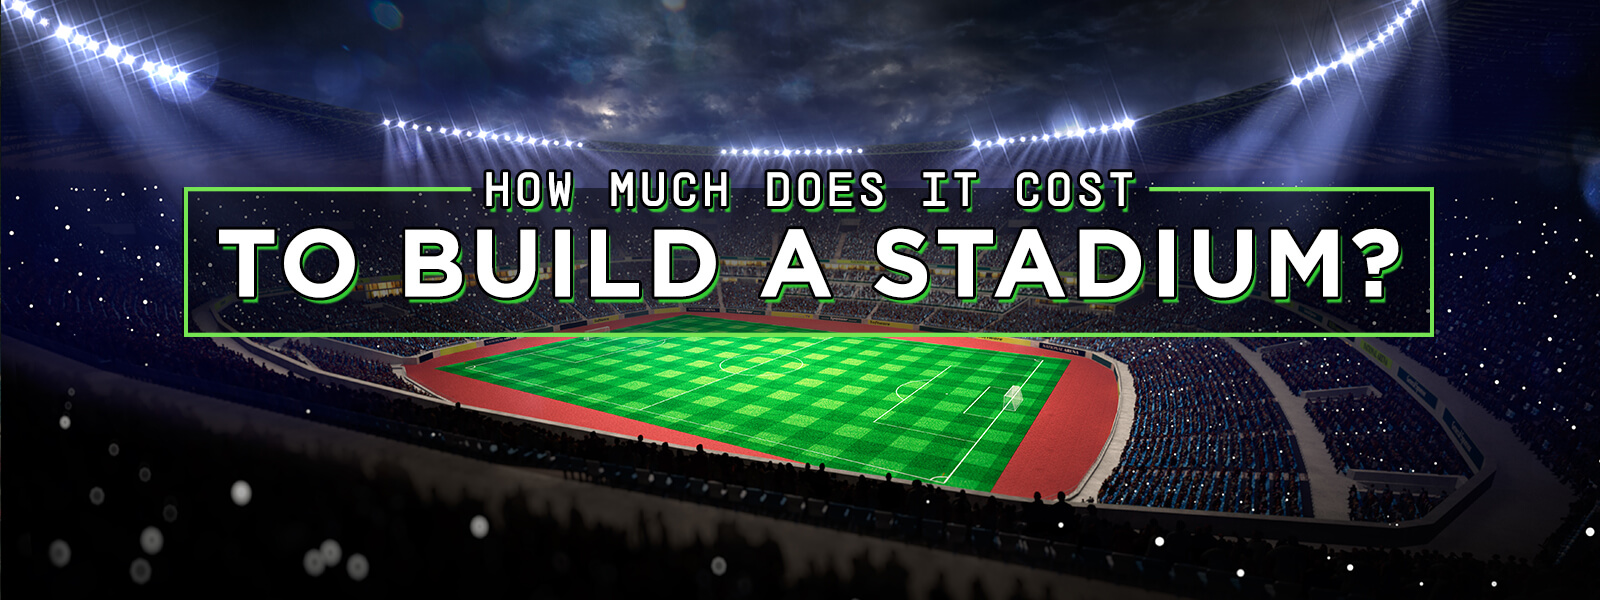 How Much Would It Cost To Build A Stadium (September) Read Now!